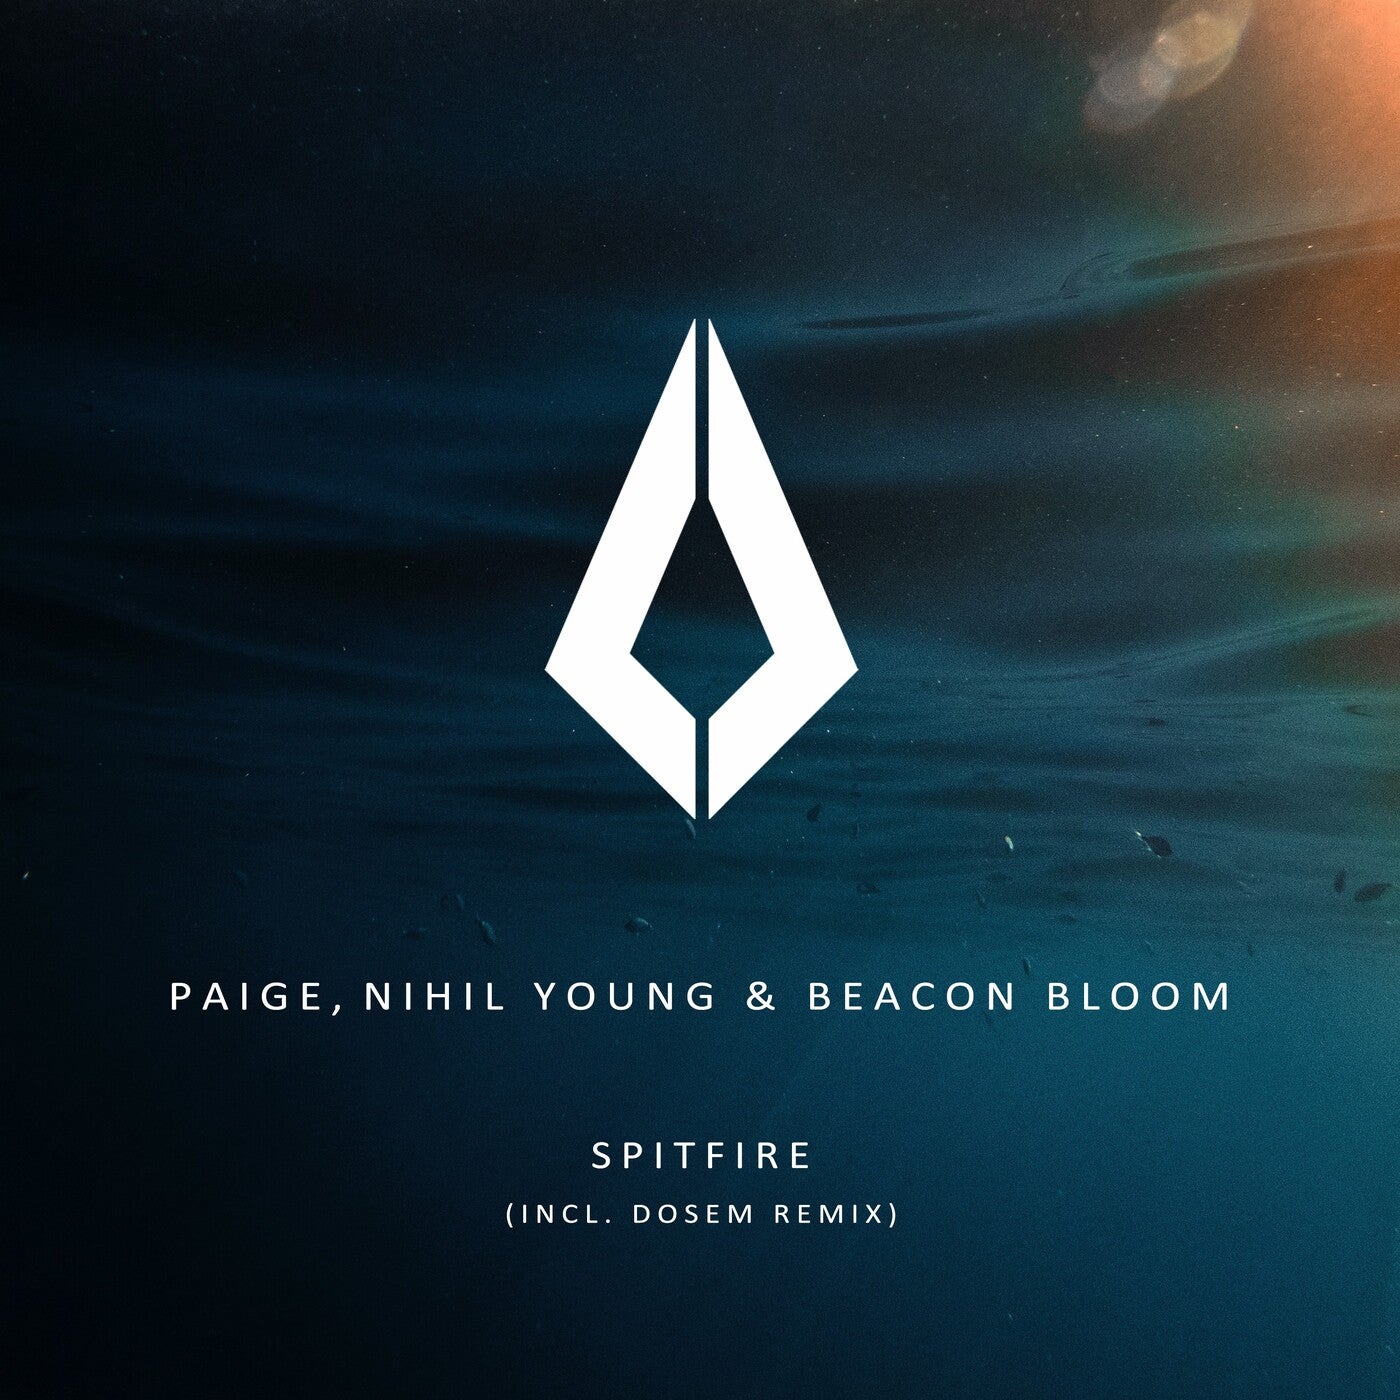 Paige, Nihil Young & Beacon Bloom - Spitfire (Dosem Extended Remix)